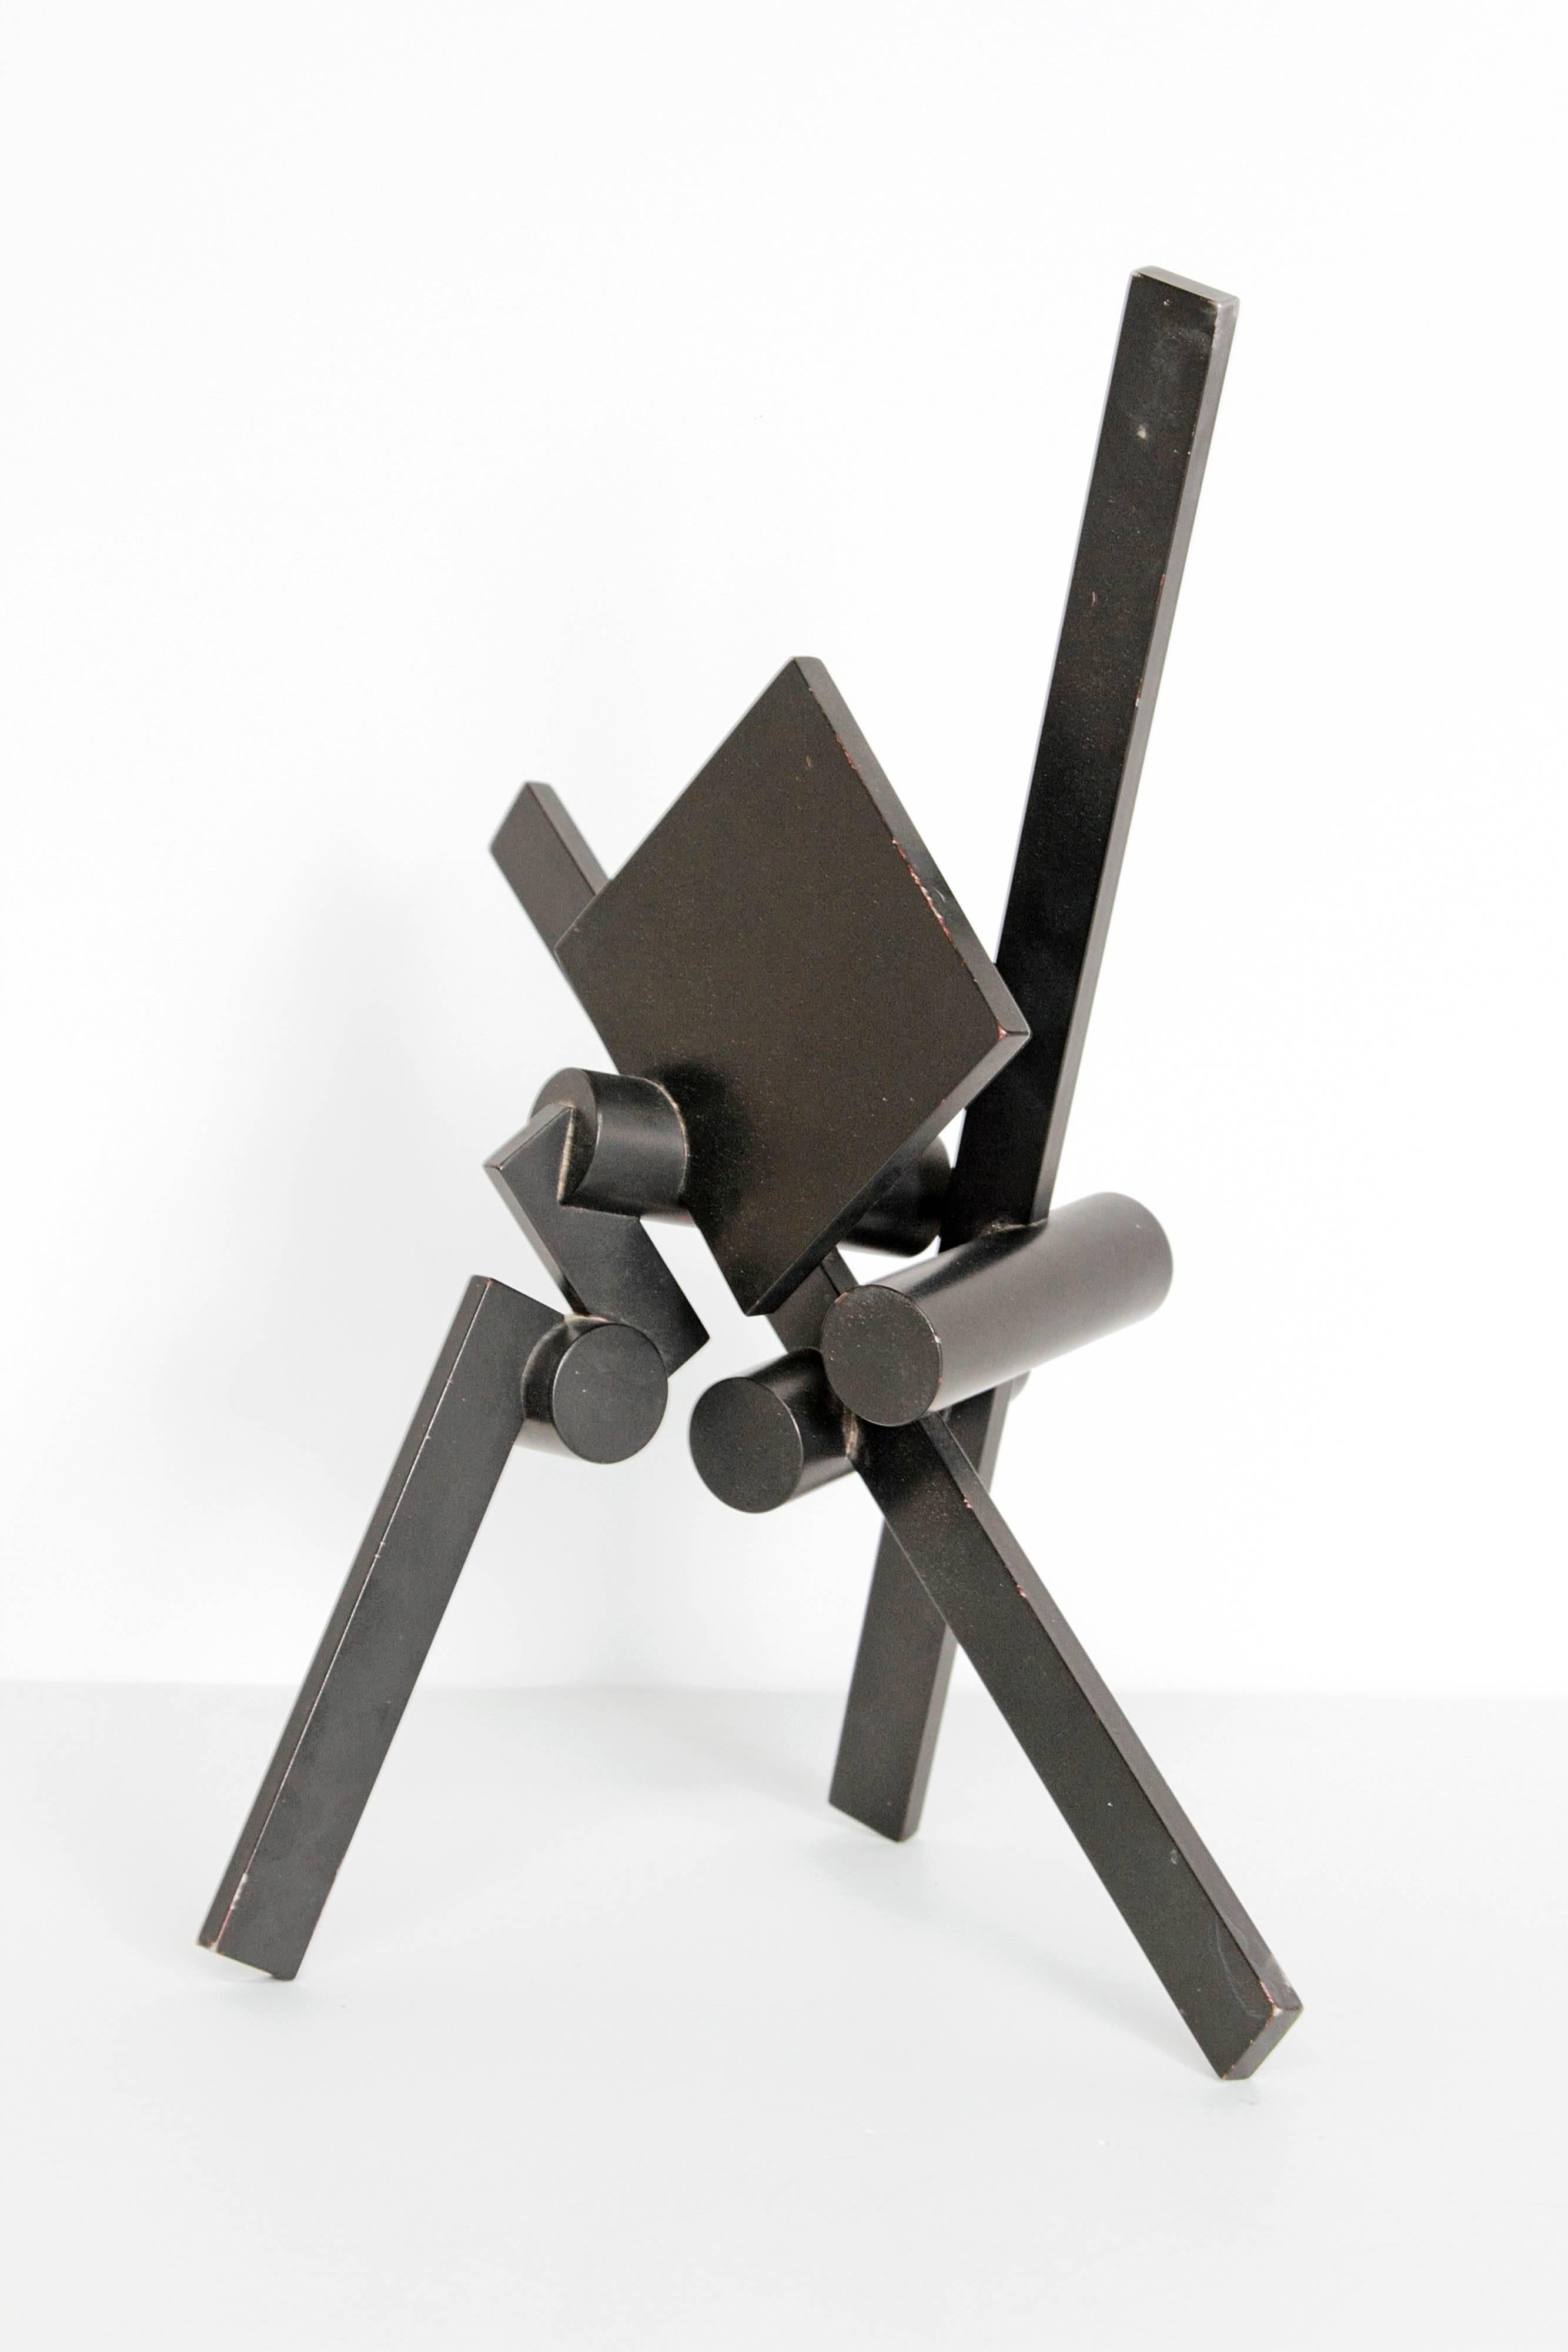 20th Century Small Modern Sculpture / G P A Series 101681 by Tom Sayre